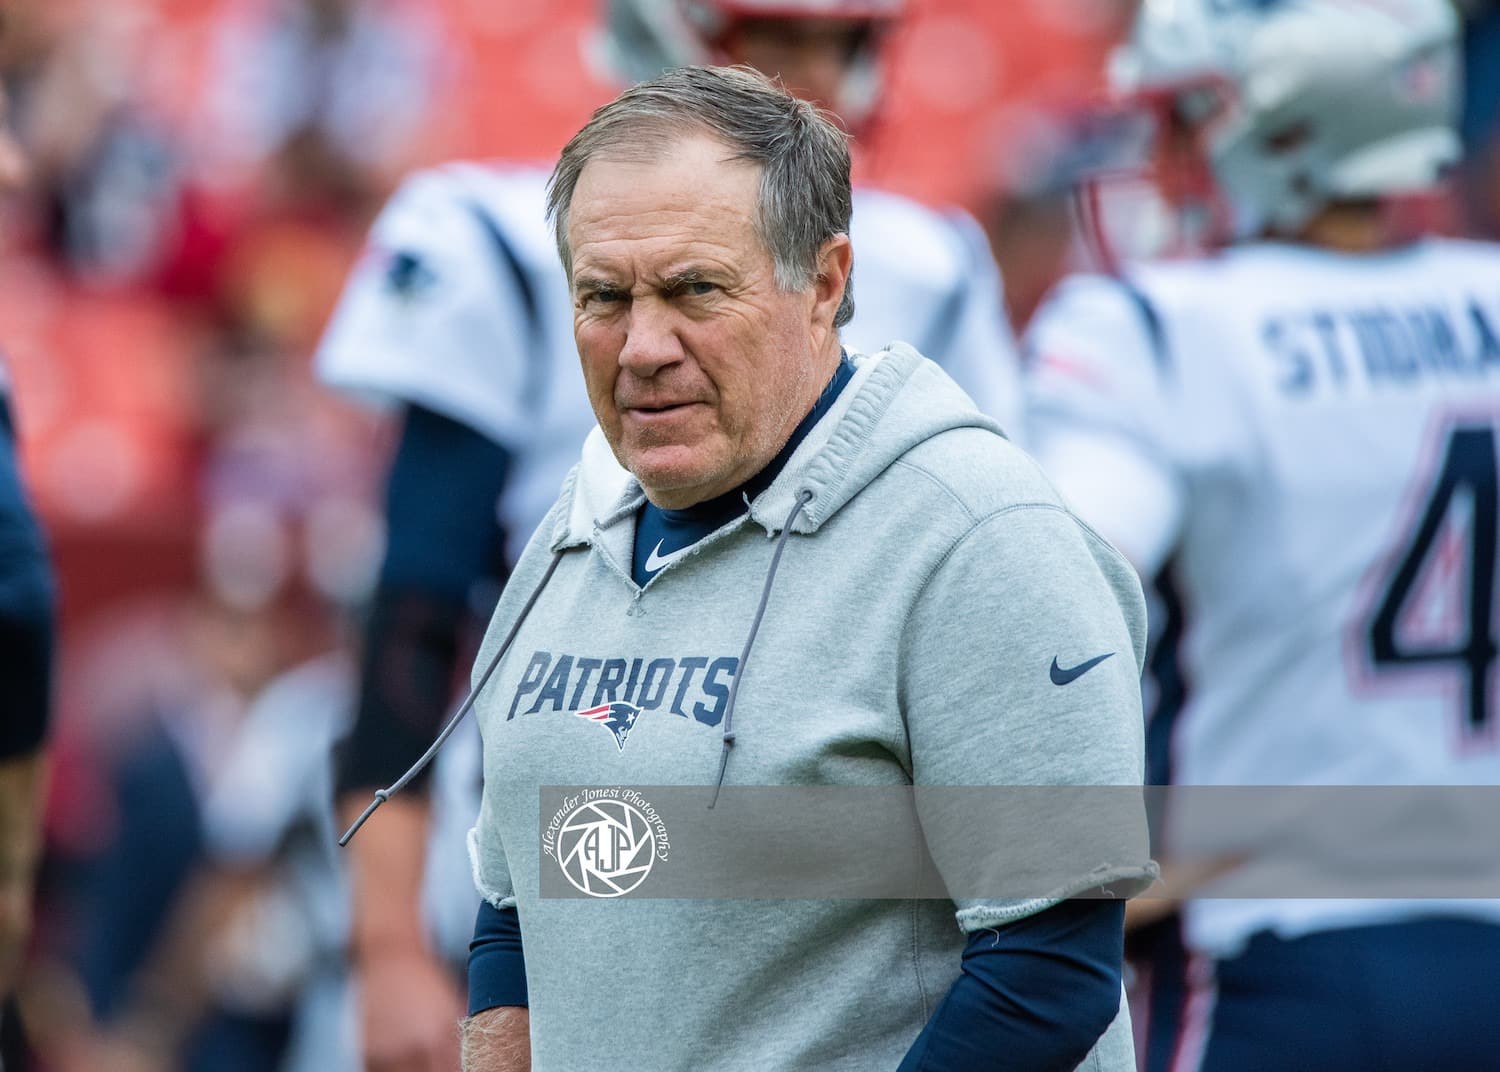 New England Patriots Head Coach And General Manager Bill Belichick. Photo Credit: Alexander Jonesi | Under Creative Commons License